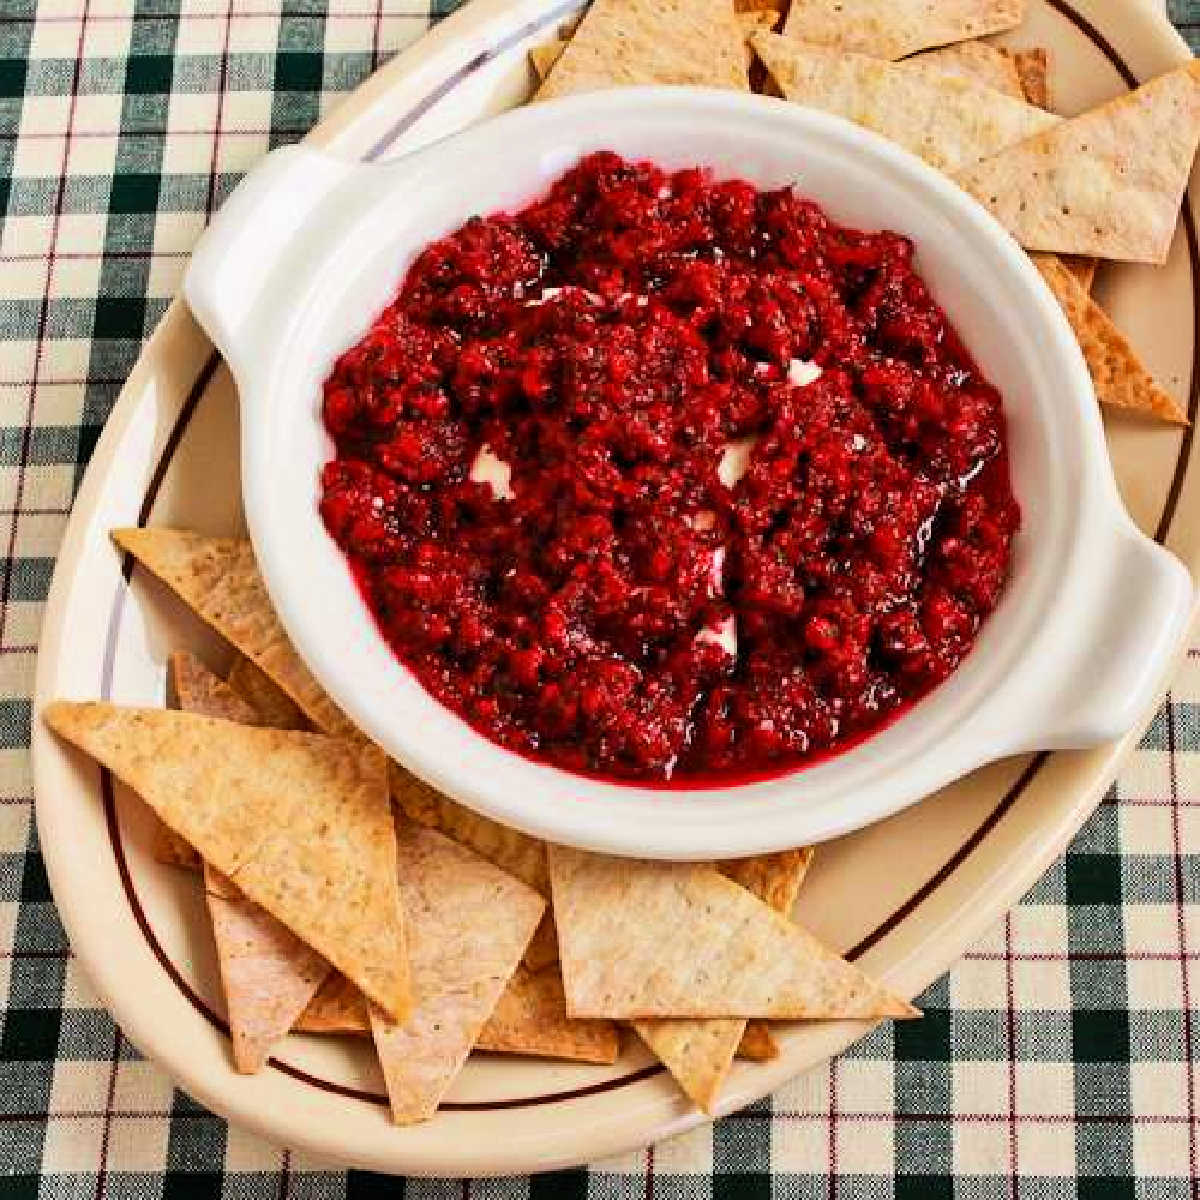 Square image of Cranberry Cream Cheese Dip shown on plate with chips.